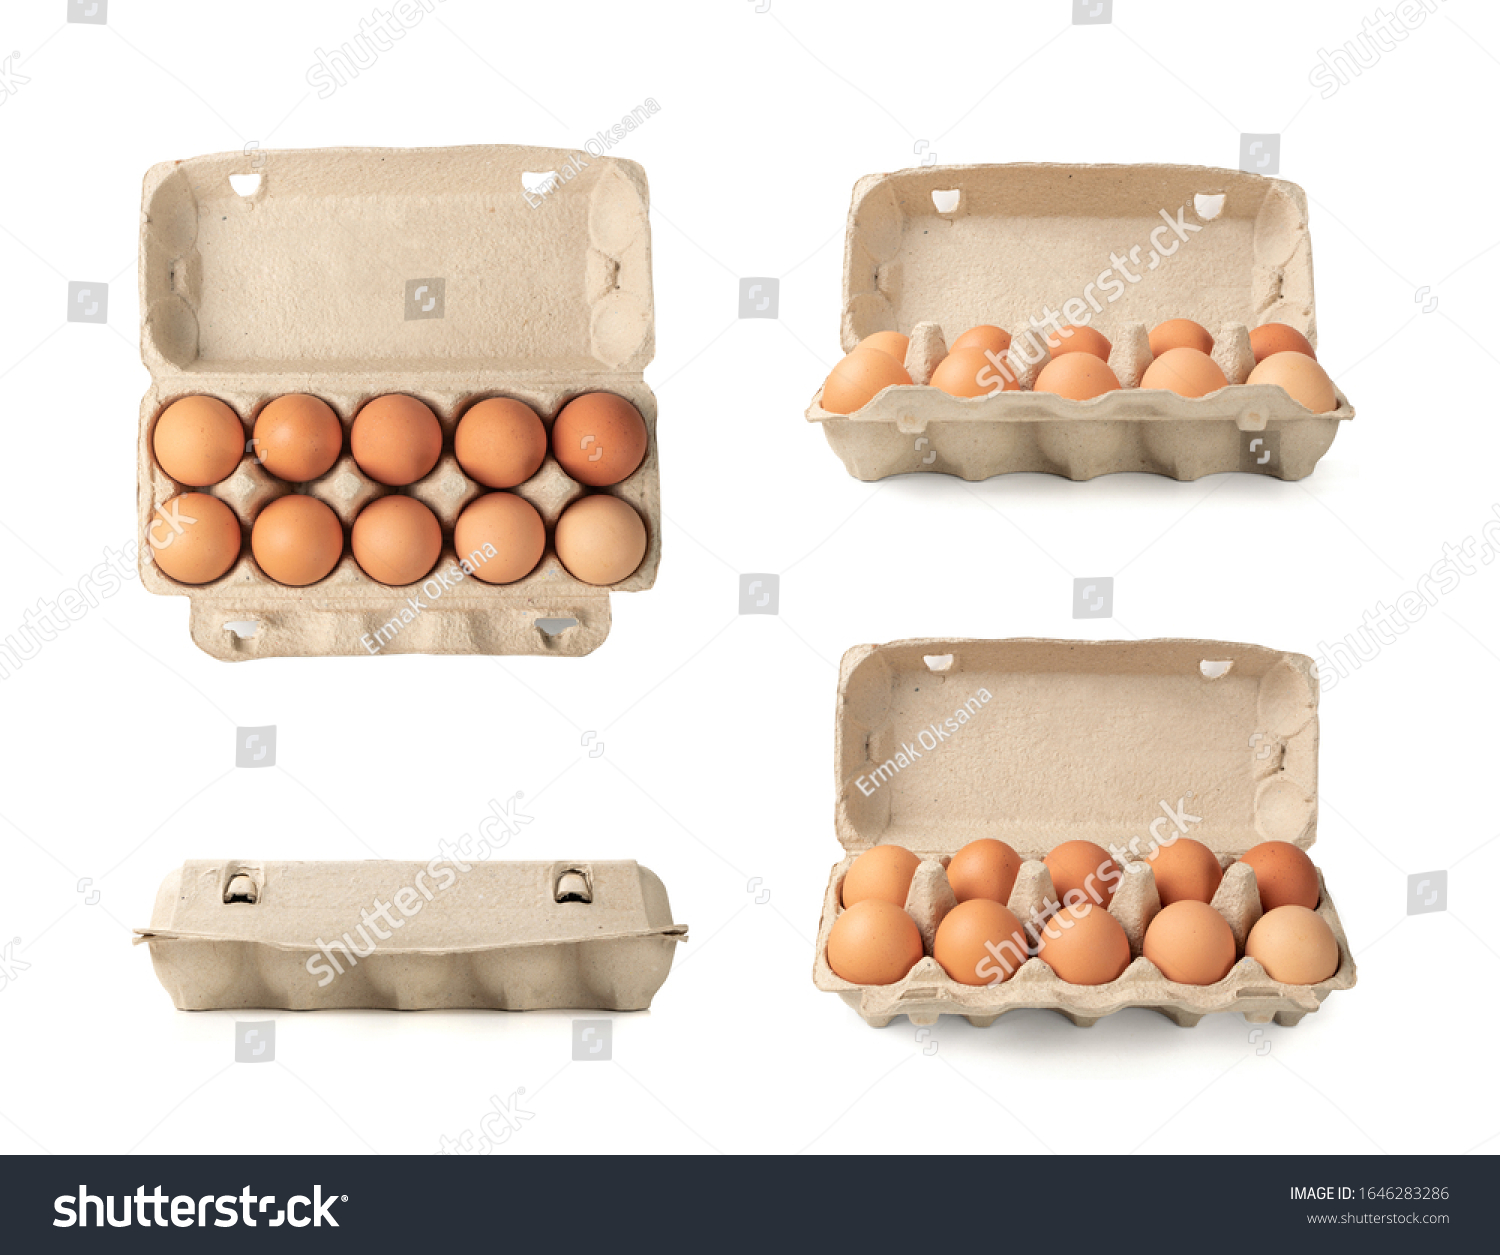 Open egg box with ten brown eggs isolated on white background with clipping path. Fresh organic chicken eggs in carton pack or egg container with copy space #1646283286